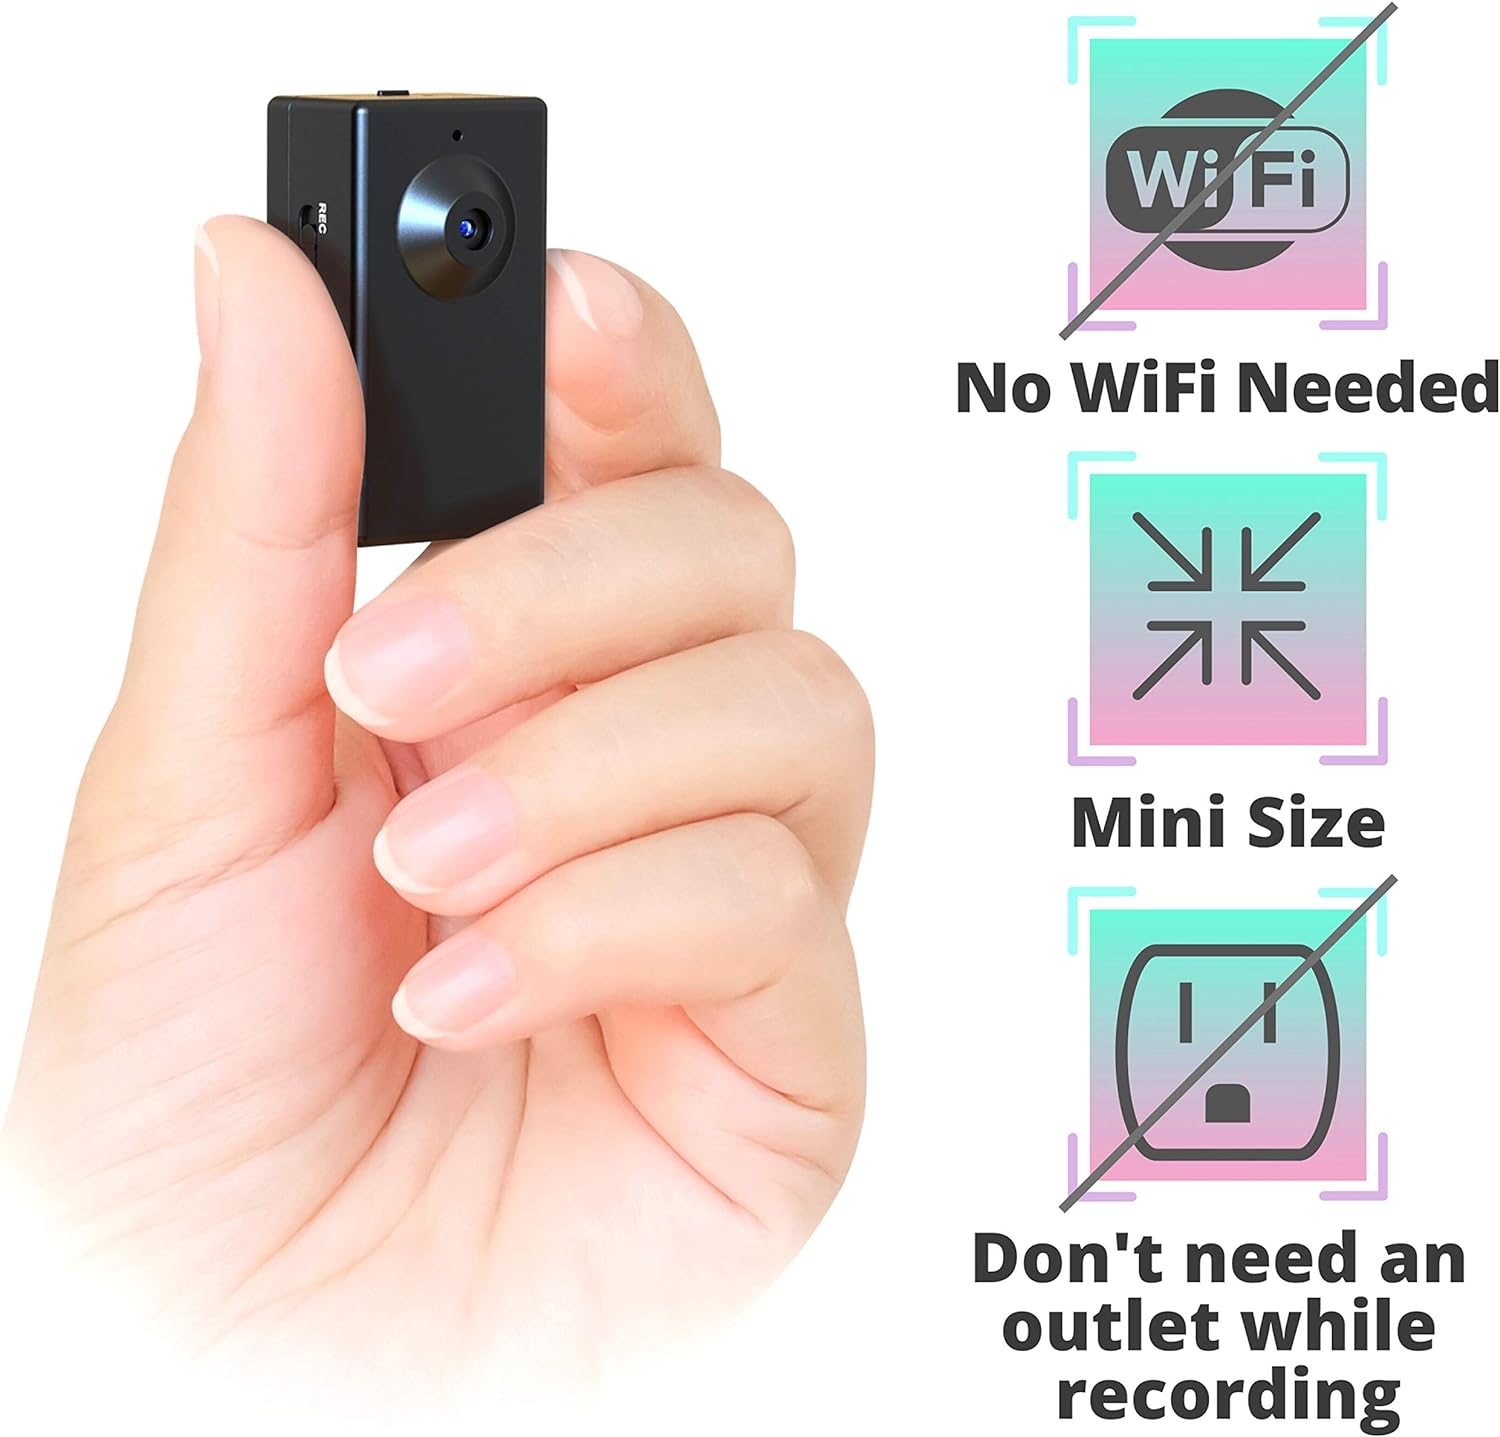 Spy Camera Without WiFi – Small Body Hidden Camera – Mini Spy Camera Motion Activated – Secret Nanny Cam – Tiny Recorder HD Video – Portable Stealth Spying Recording Camera Home Security Easy to Use